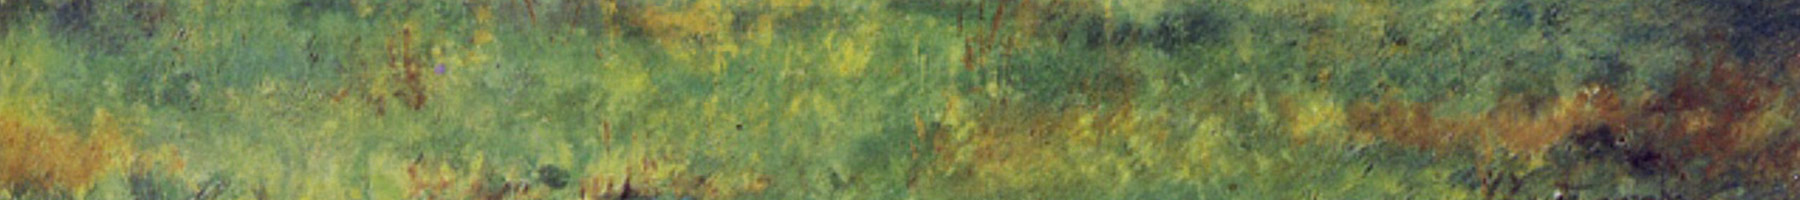 painting of blurry grass